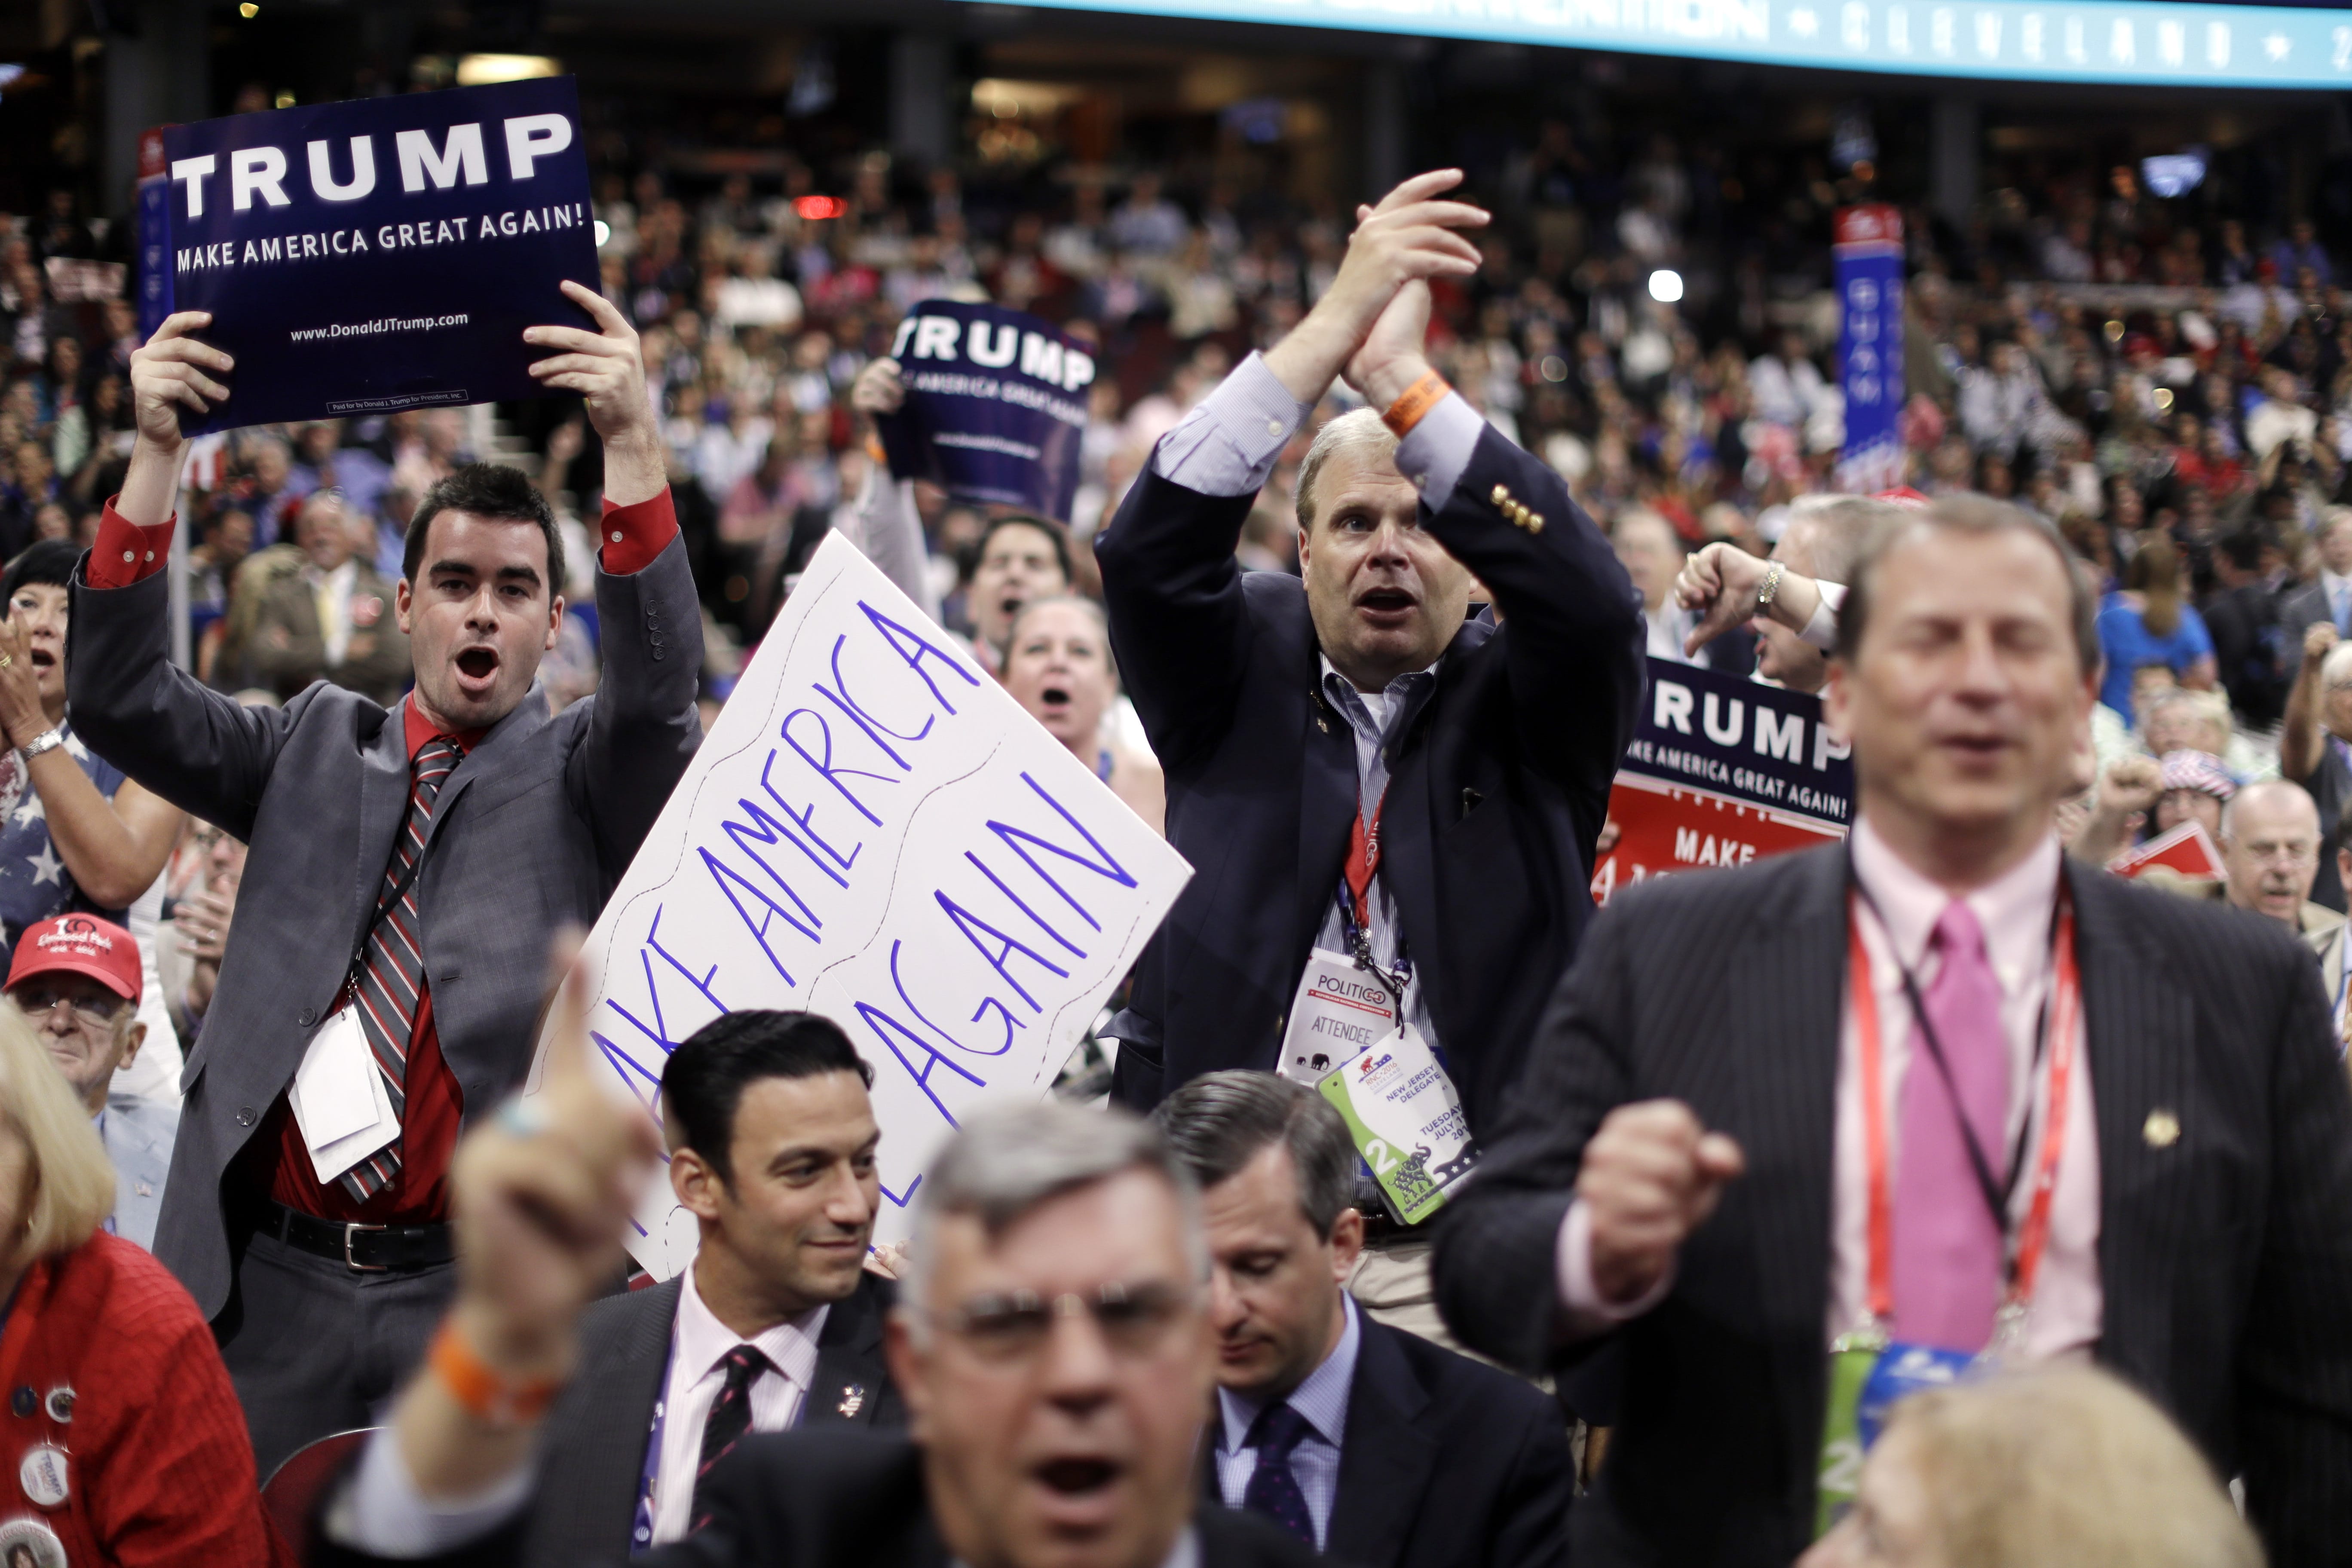 New Jersey delegates cheer as New Jersey Gov. Chris Christie speaks during the second day session of the Republican National Convention in Cleveland, Tuesday, July 19, 2016.